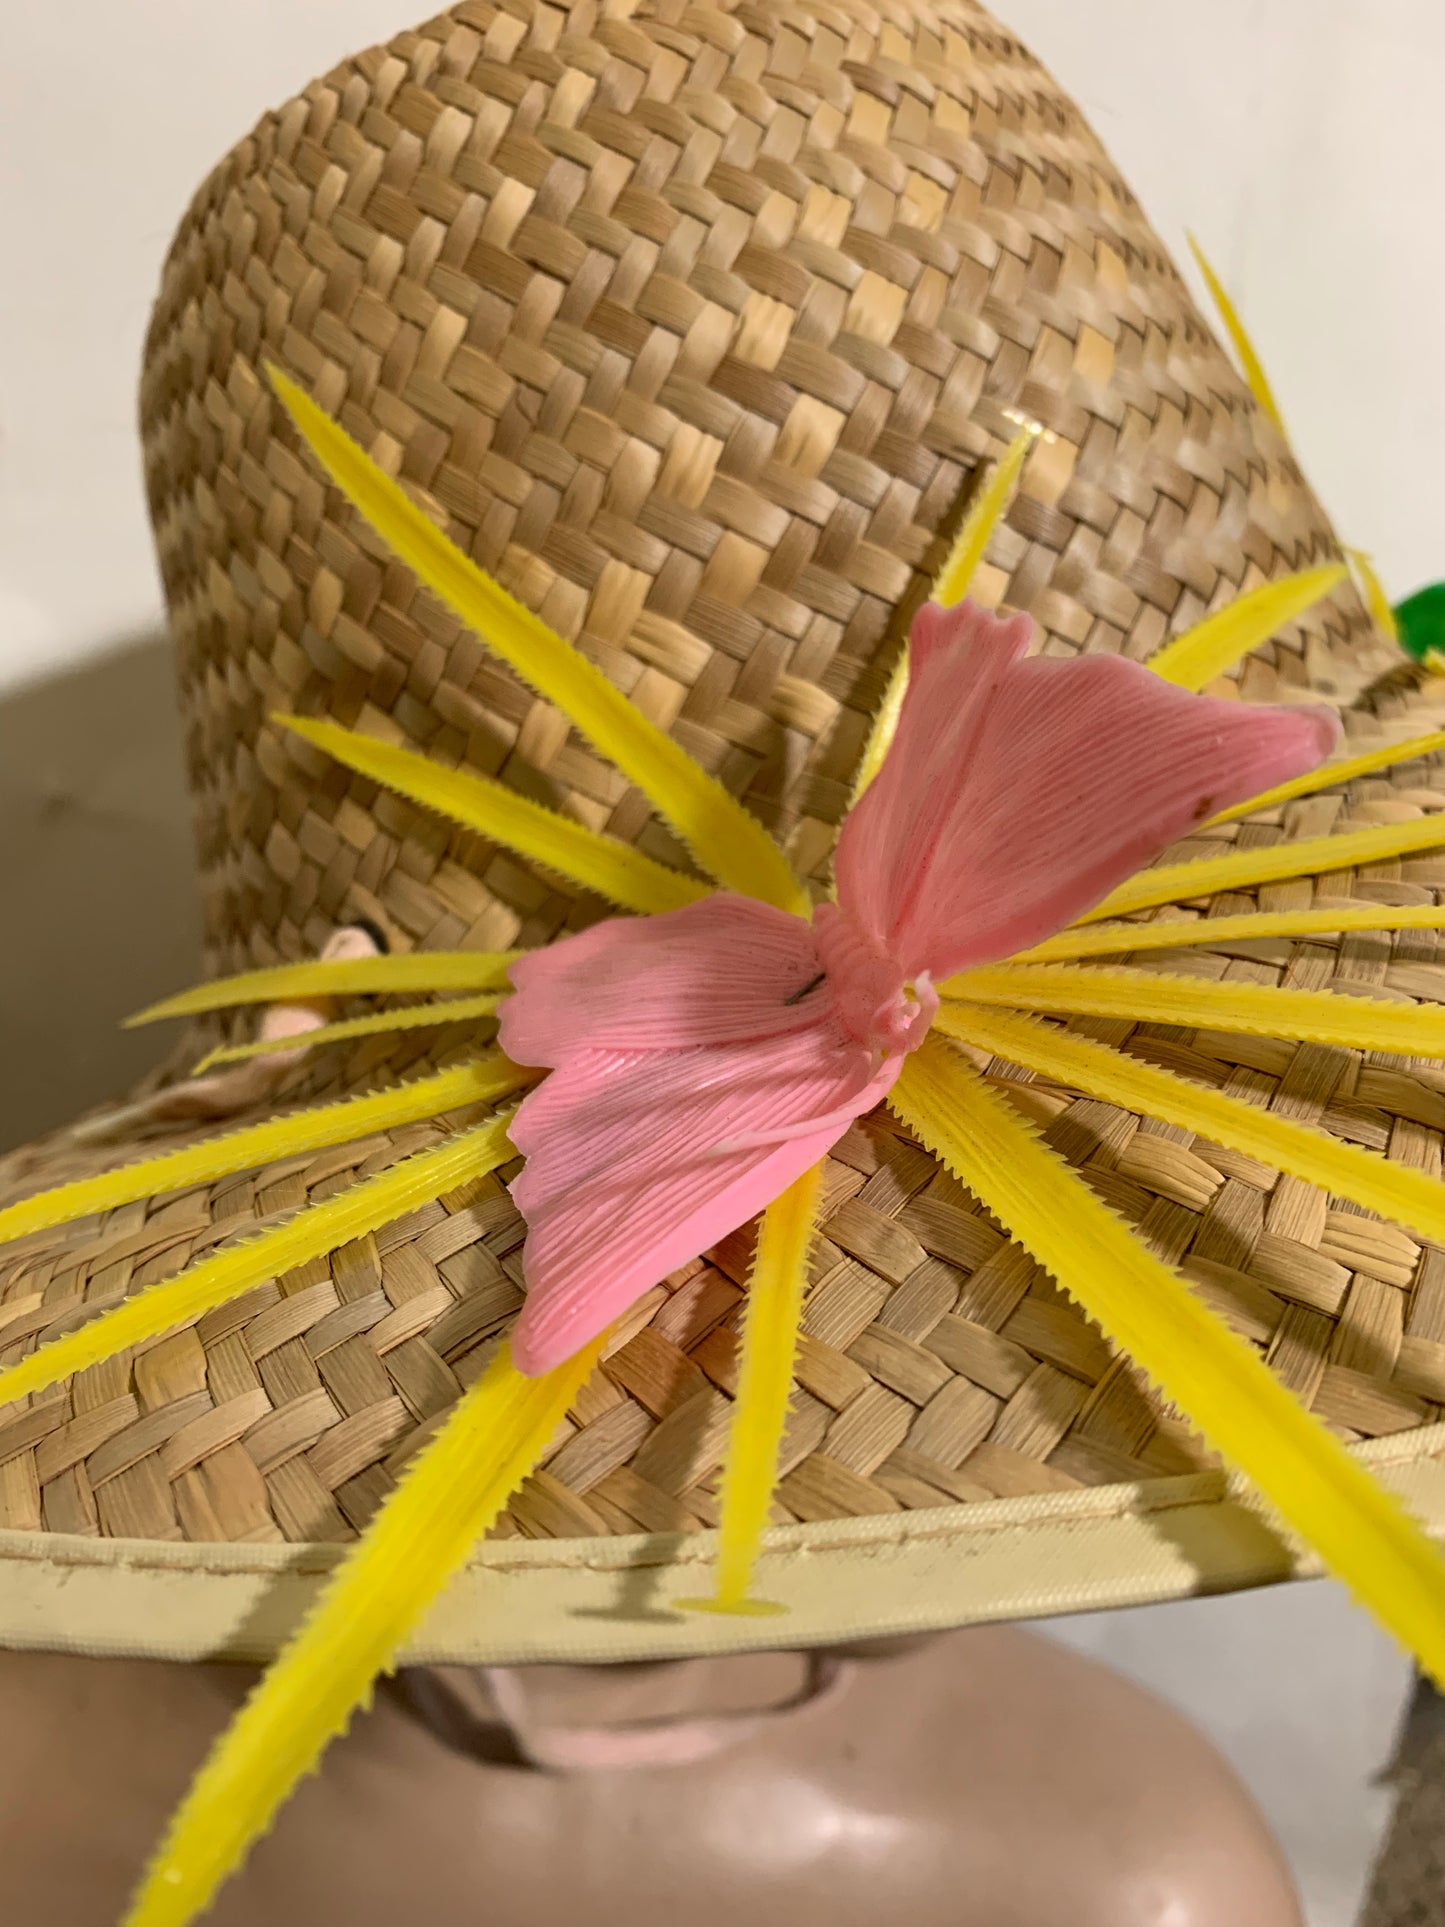 Braided Flat Straw Sun Hat with Butterflies and Flowers circa 1940s